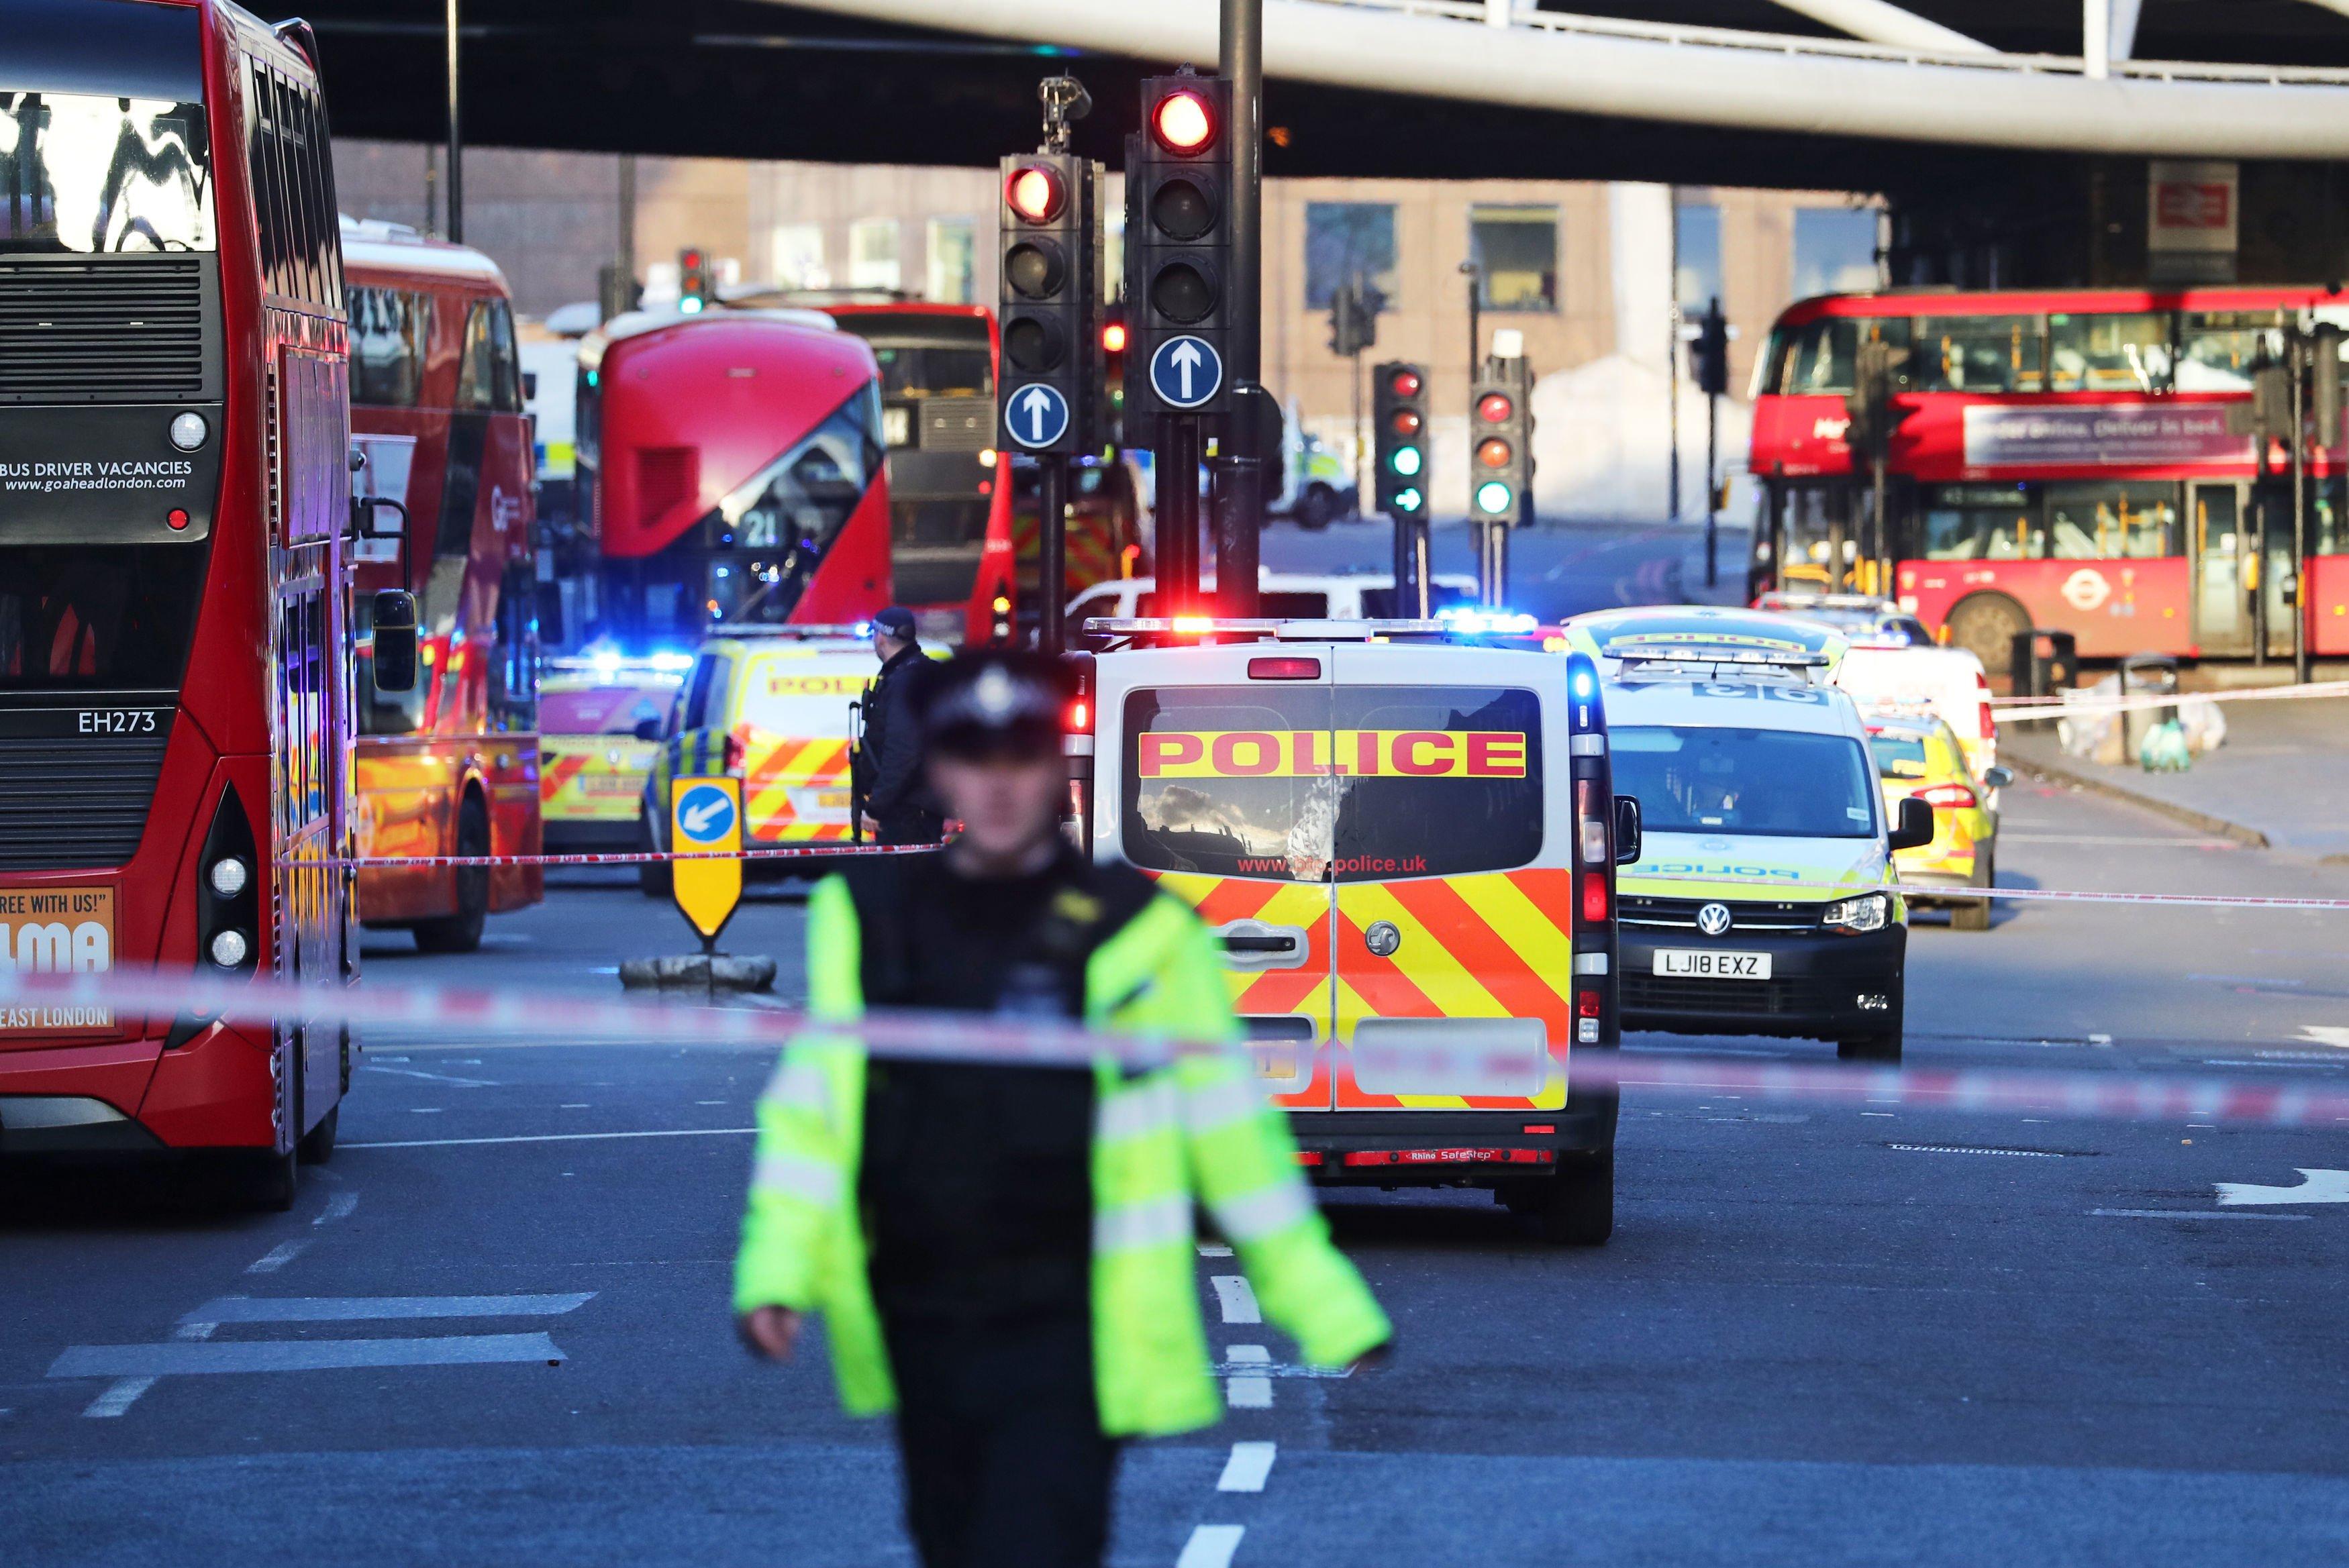 Police and emergency services at the scene of an incident on London Bridge in central London